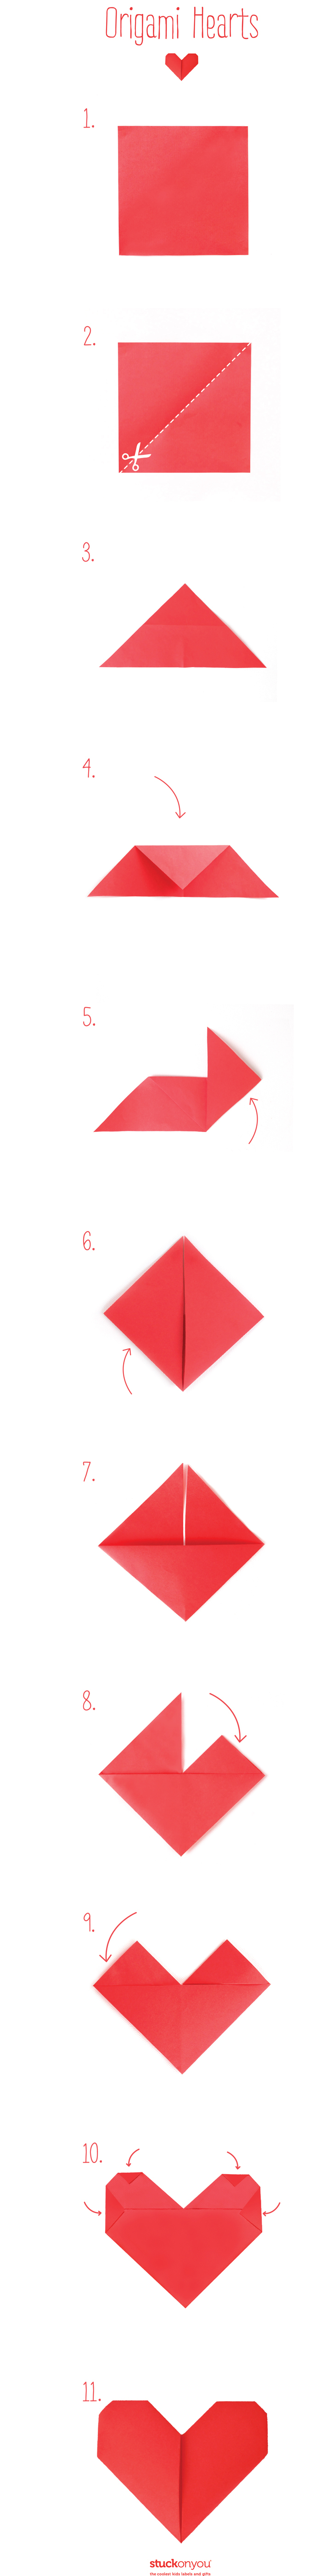 How To Make An Origami Heart How To Make Origami Hearts Stuck On You